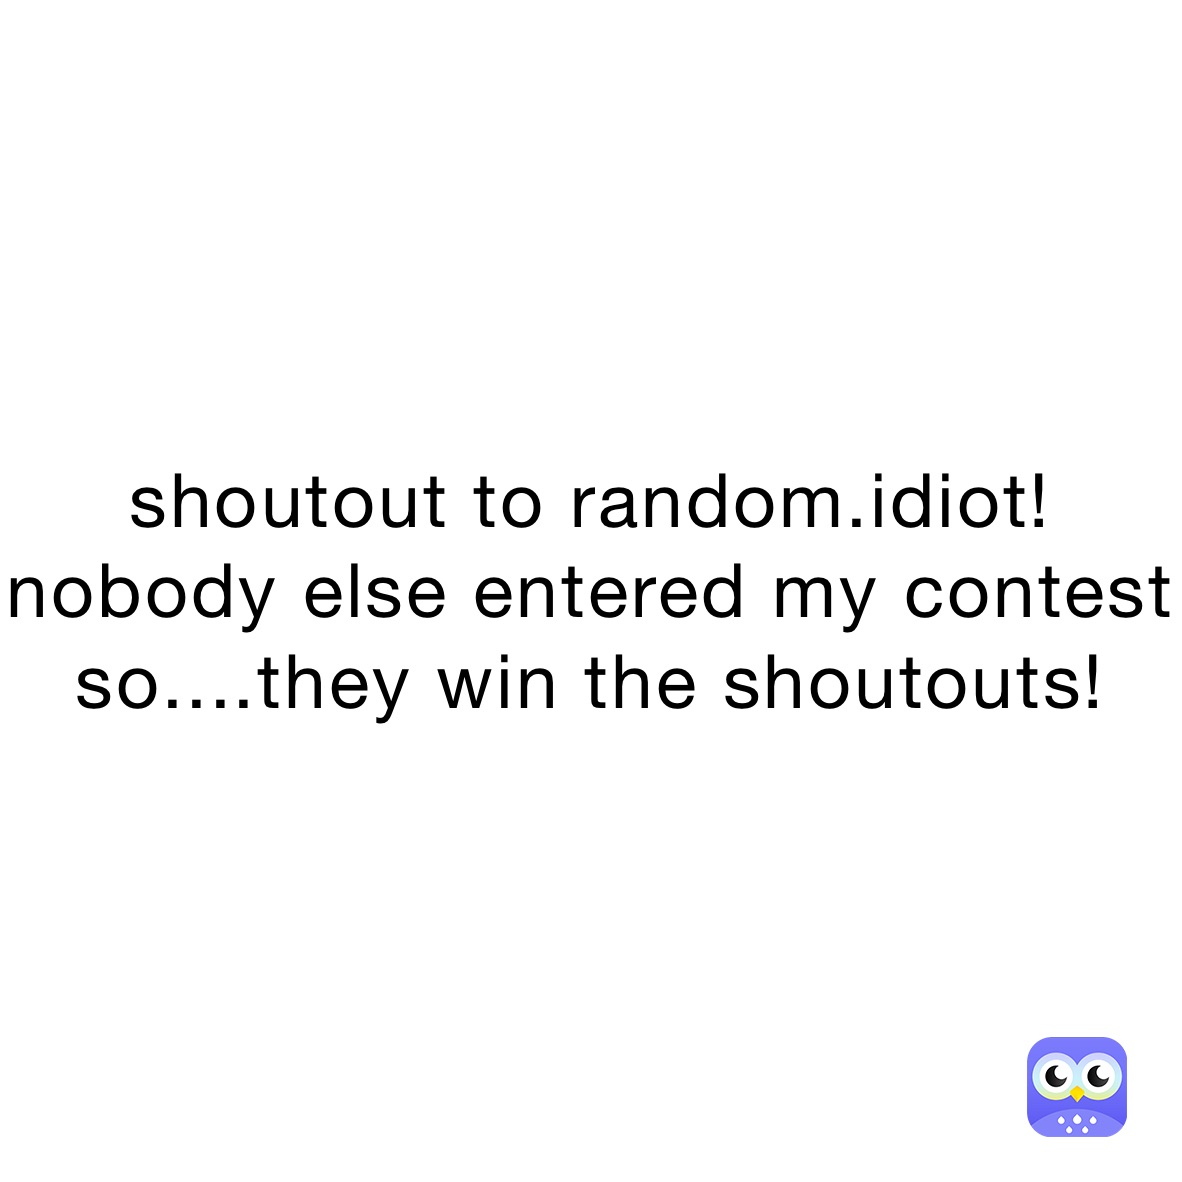 shoutout to random.idiot! 
nobody else entered my contest so....they win the shoutouts!